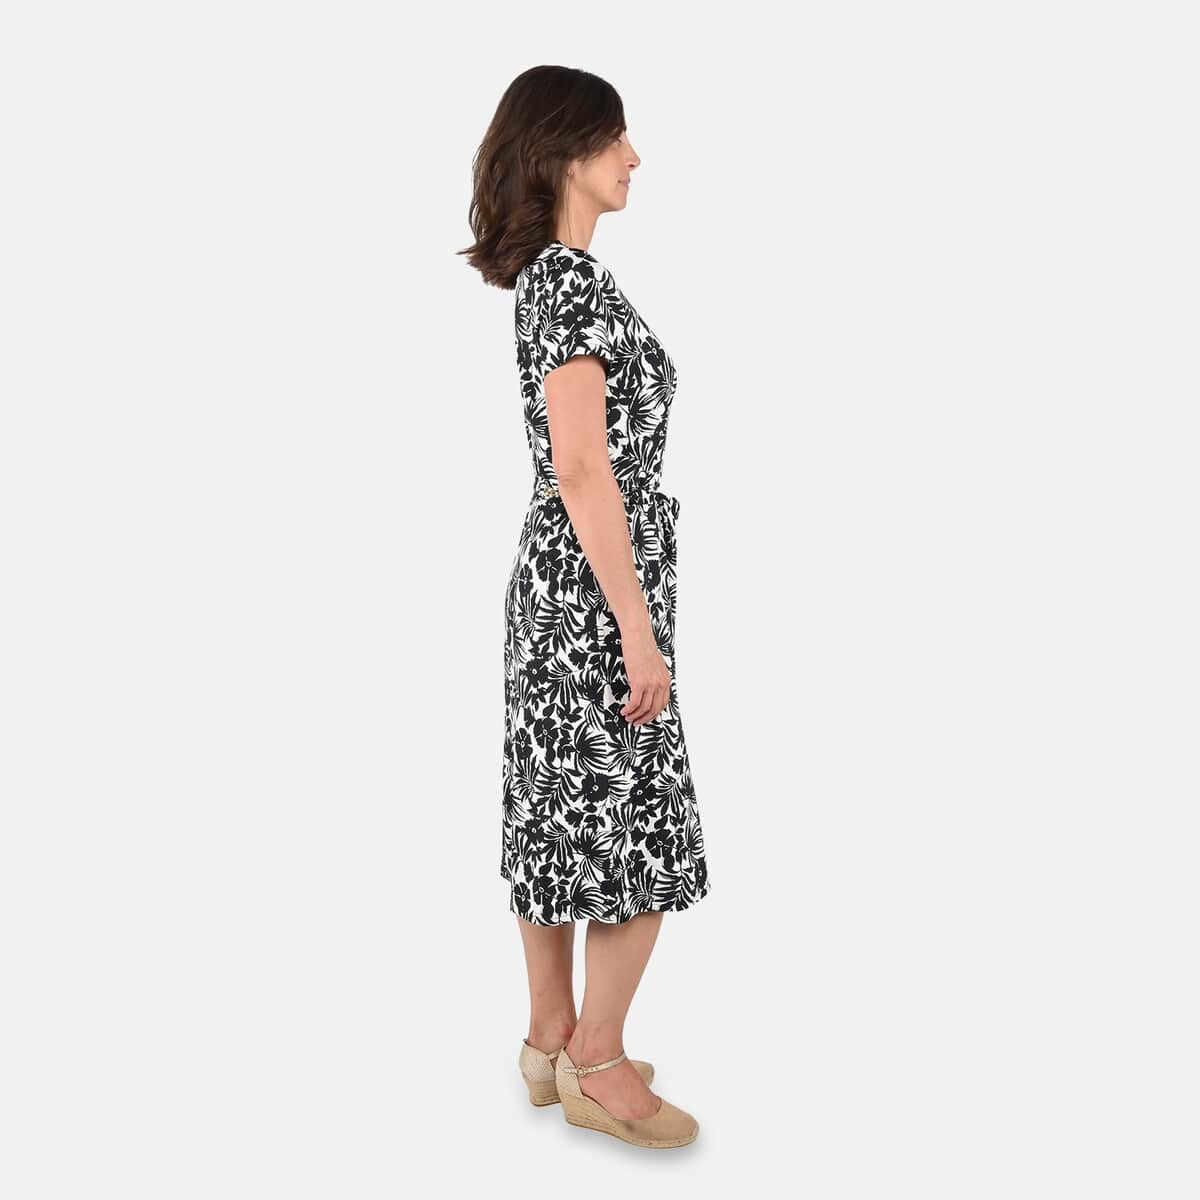 Tamsy Black and White Floral Pattern Dress - (XL) image number 2